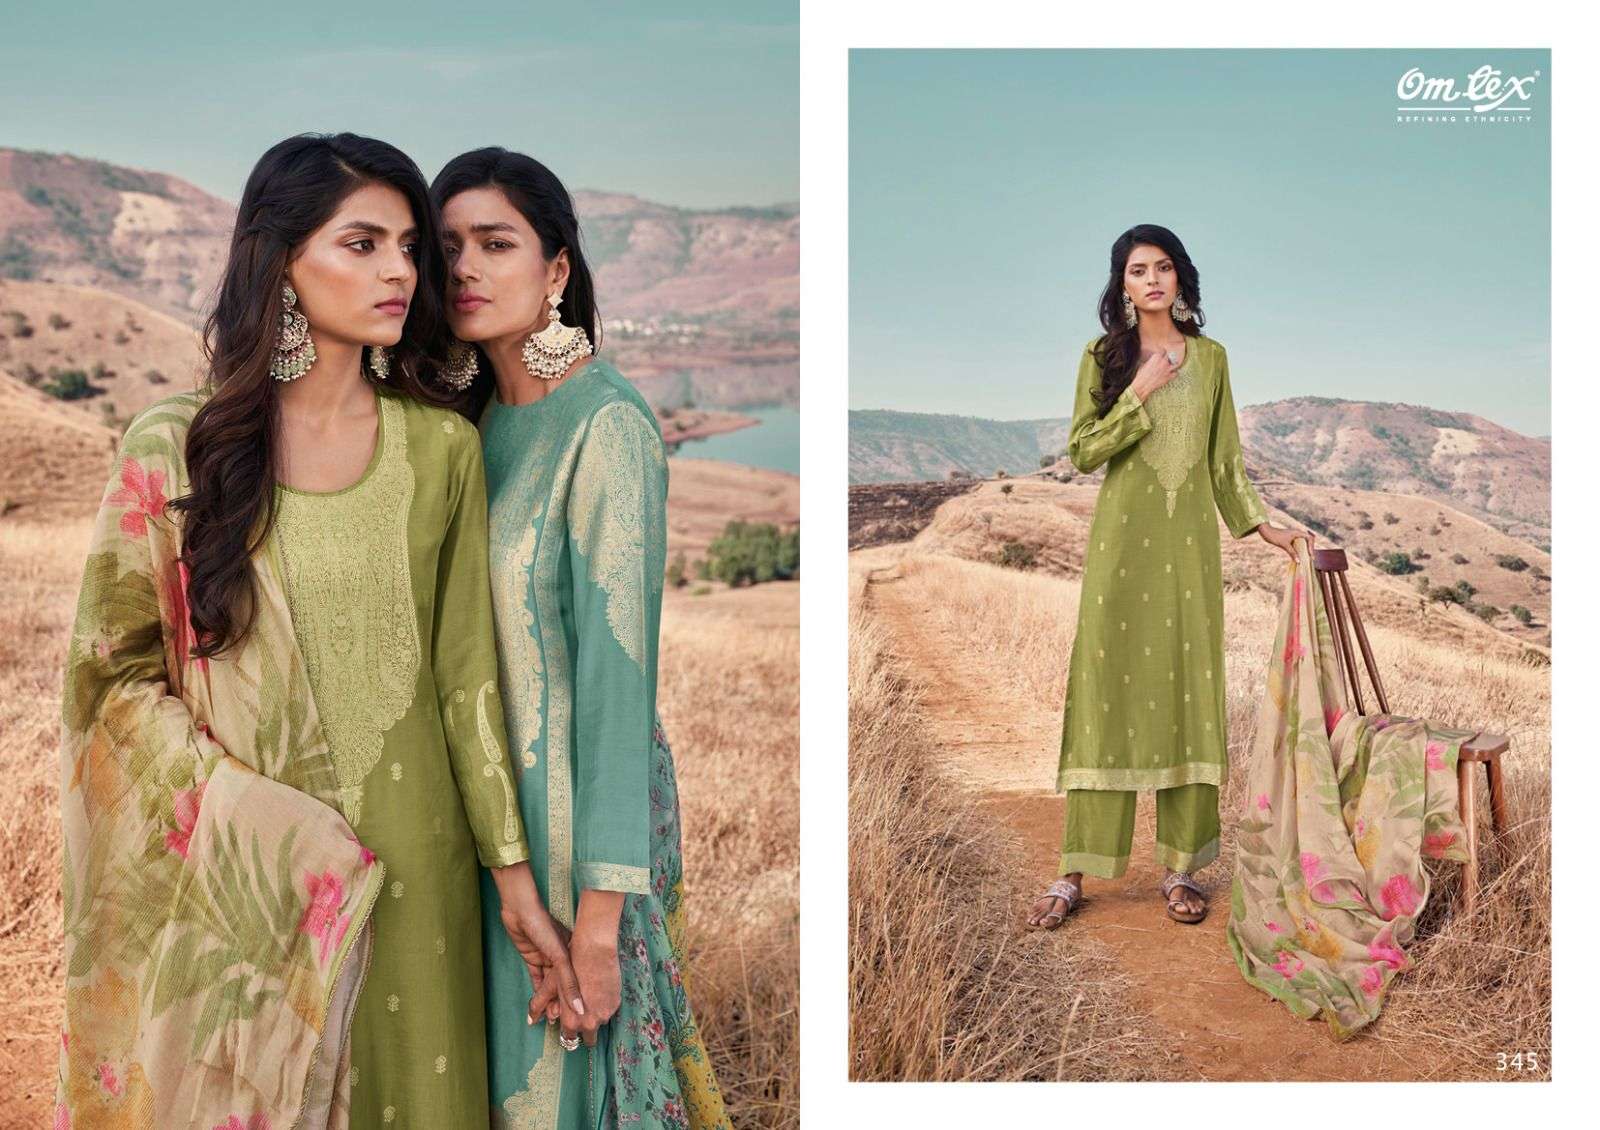 AAMOD VOL-2 BY OM TEX 341 TO 346 SERIES BEAUTIFUL SUITS COLORFUL STYLISH FANCY CASUAL WEAR & ETHNIC WEAR MUSLEEN JACQUARD DRESSES AT WHOLESALE PRICE